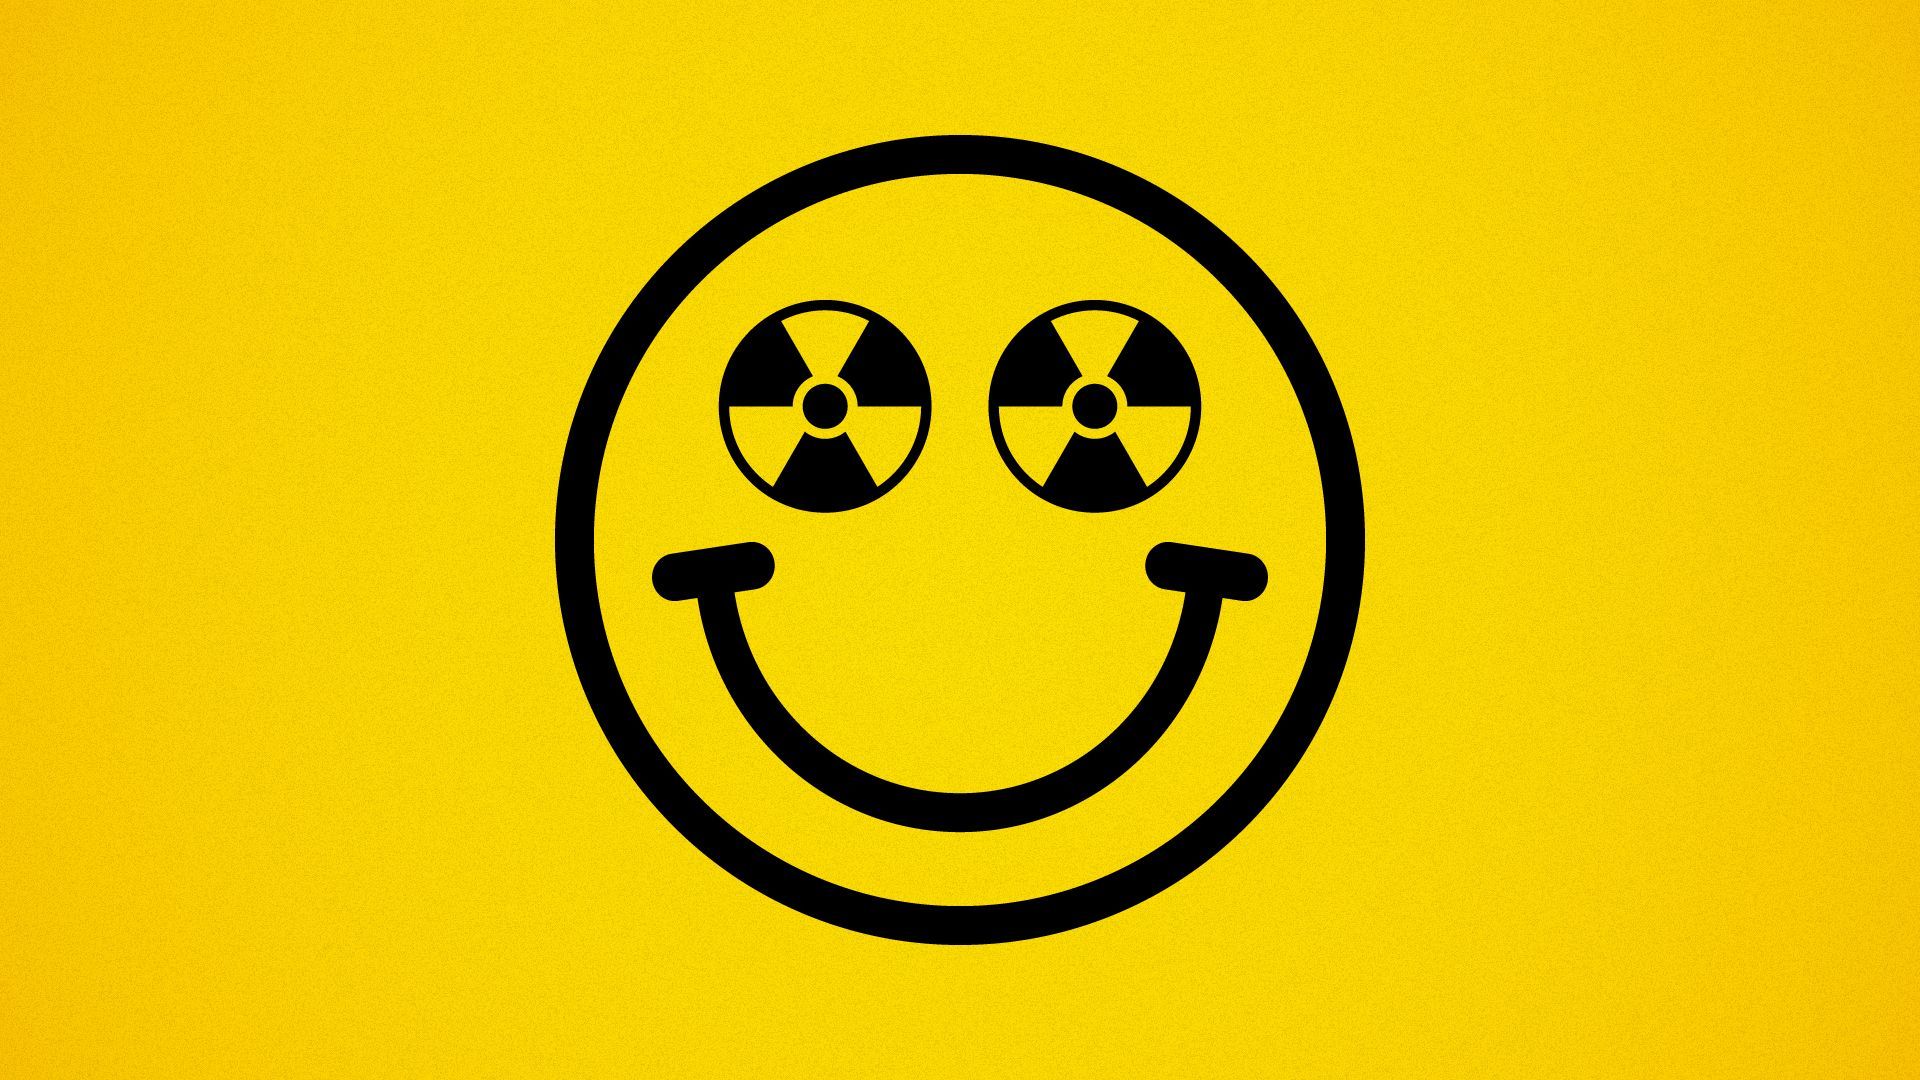 Illustration of a smiley face with radiation symbols for eyes.